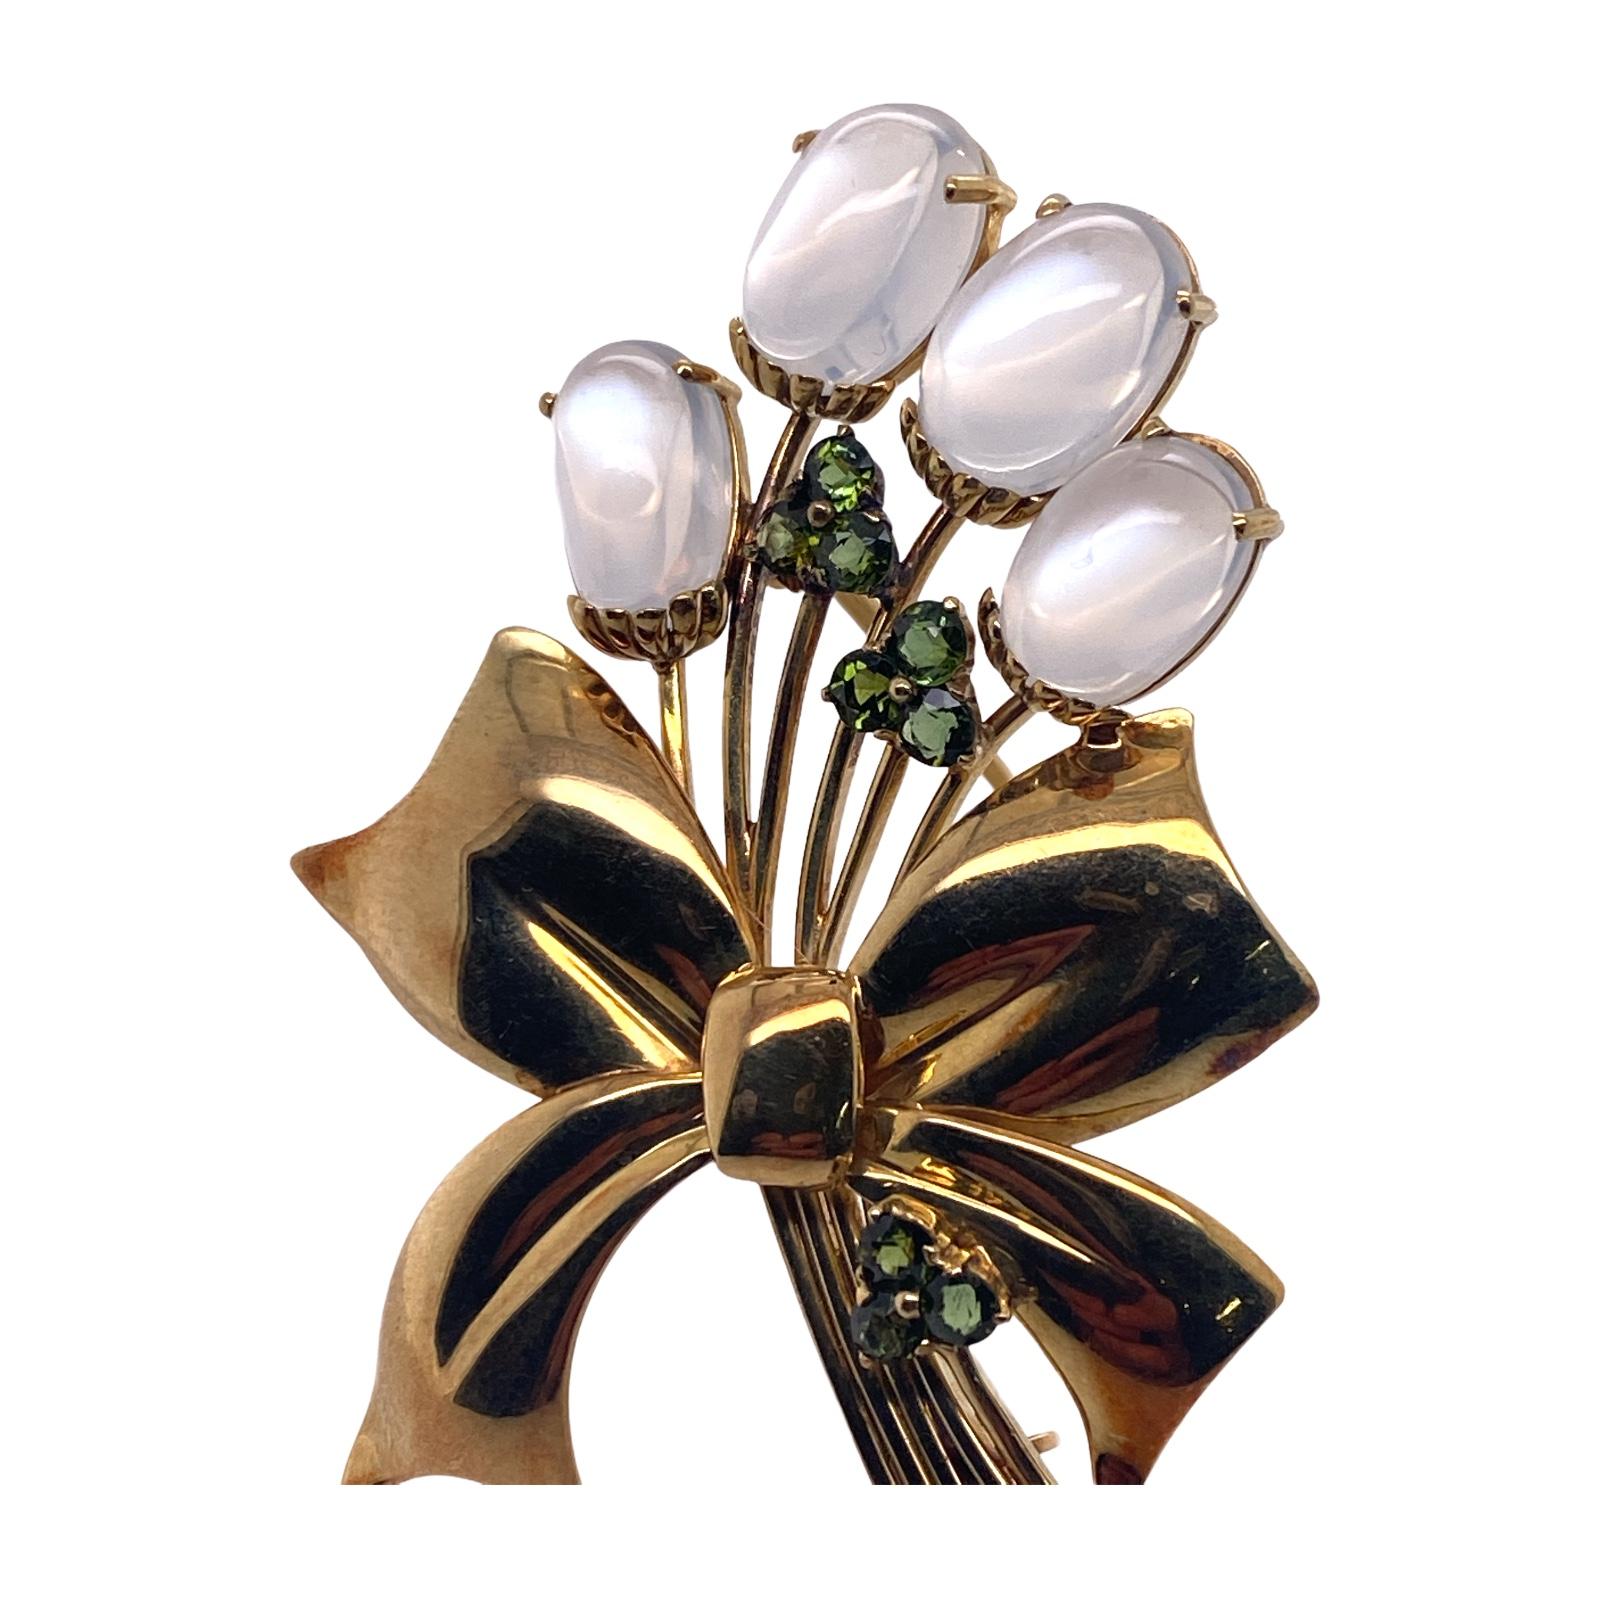 Moonstone and peridot ribbon pin fashioned in 14 Karat yellow gold. The Retro brooch features oval cabochon carved moonstone and round peridot in a wheat ribbon design. The pin measures 40 x 55mm. 